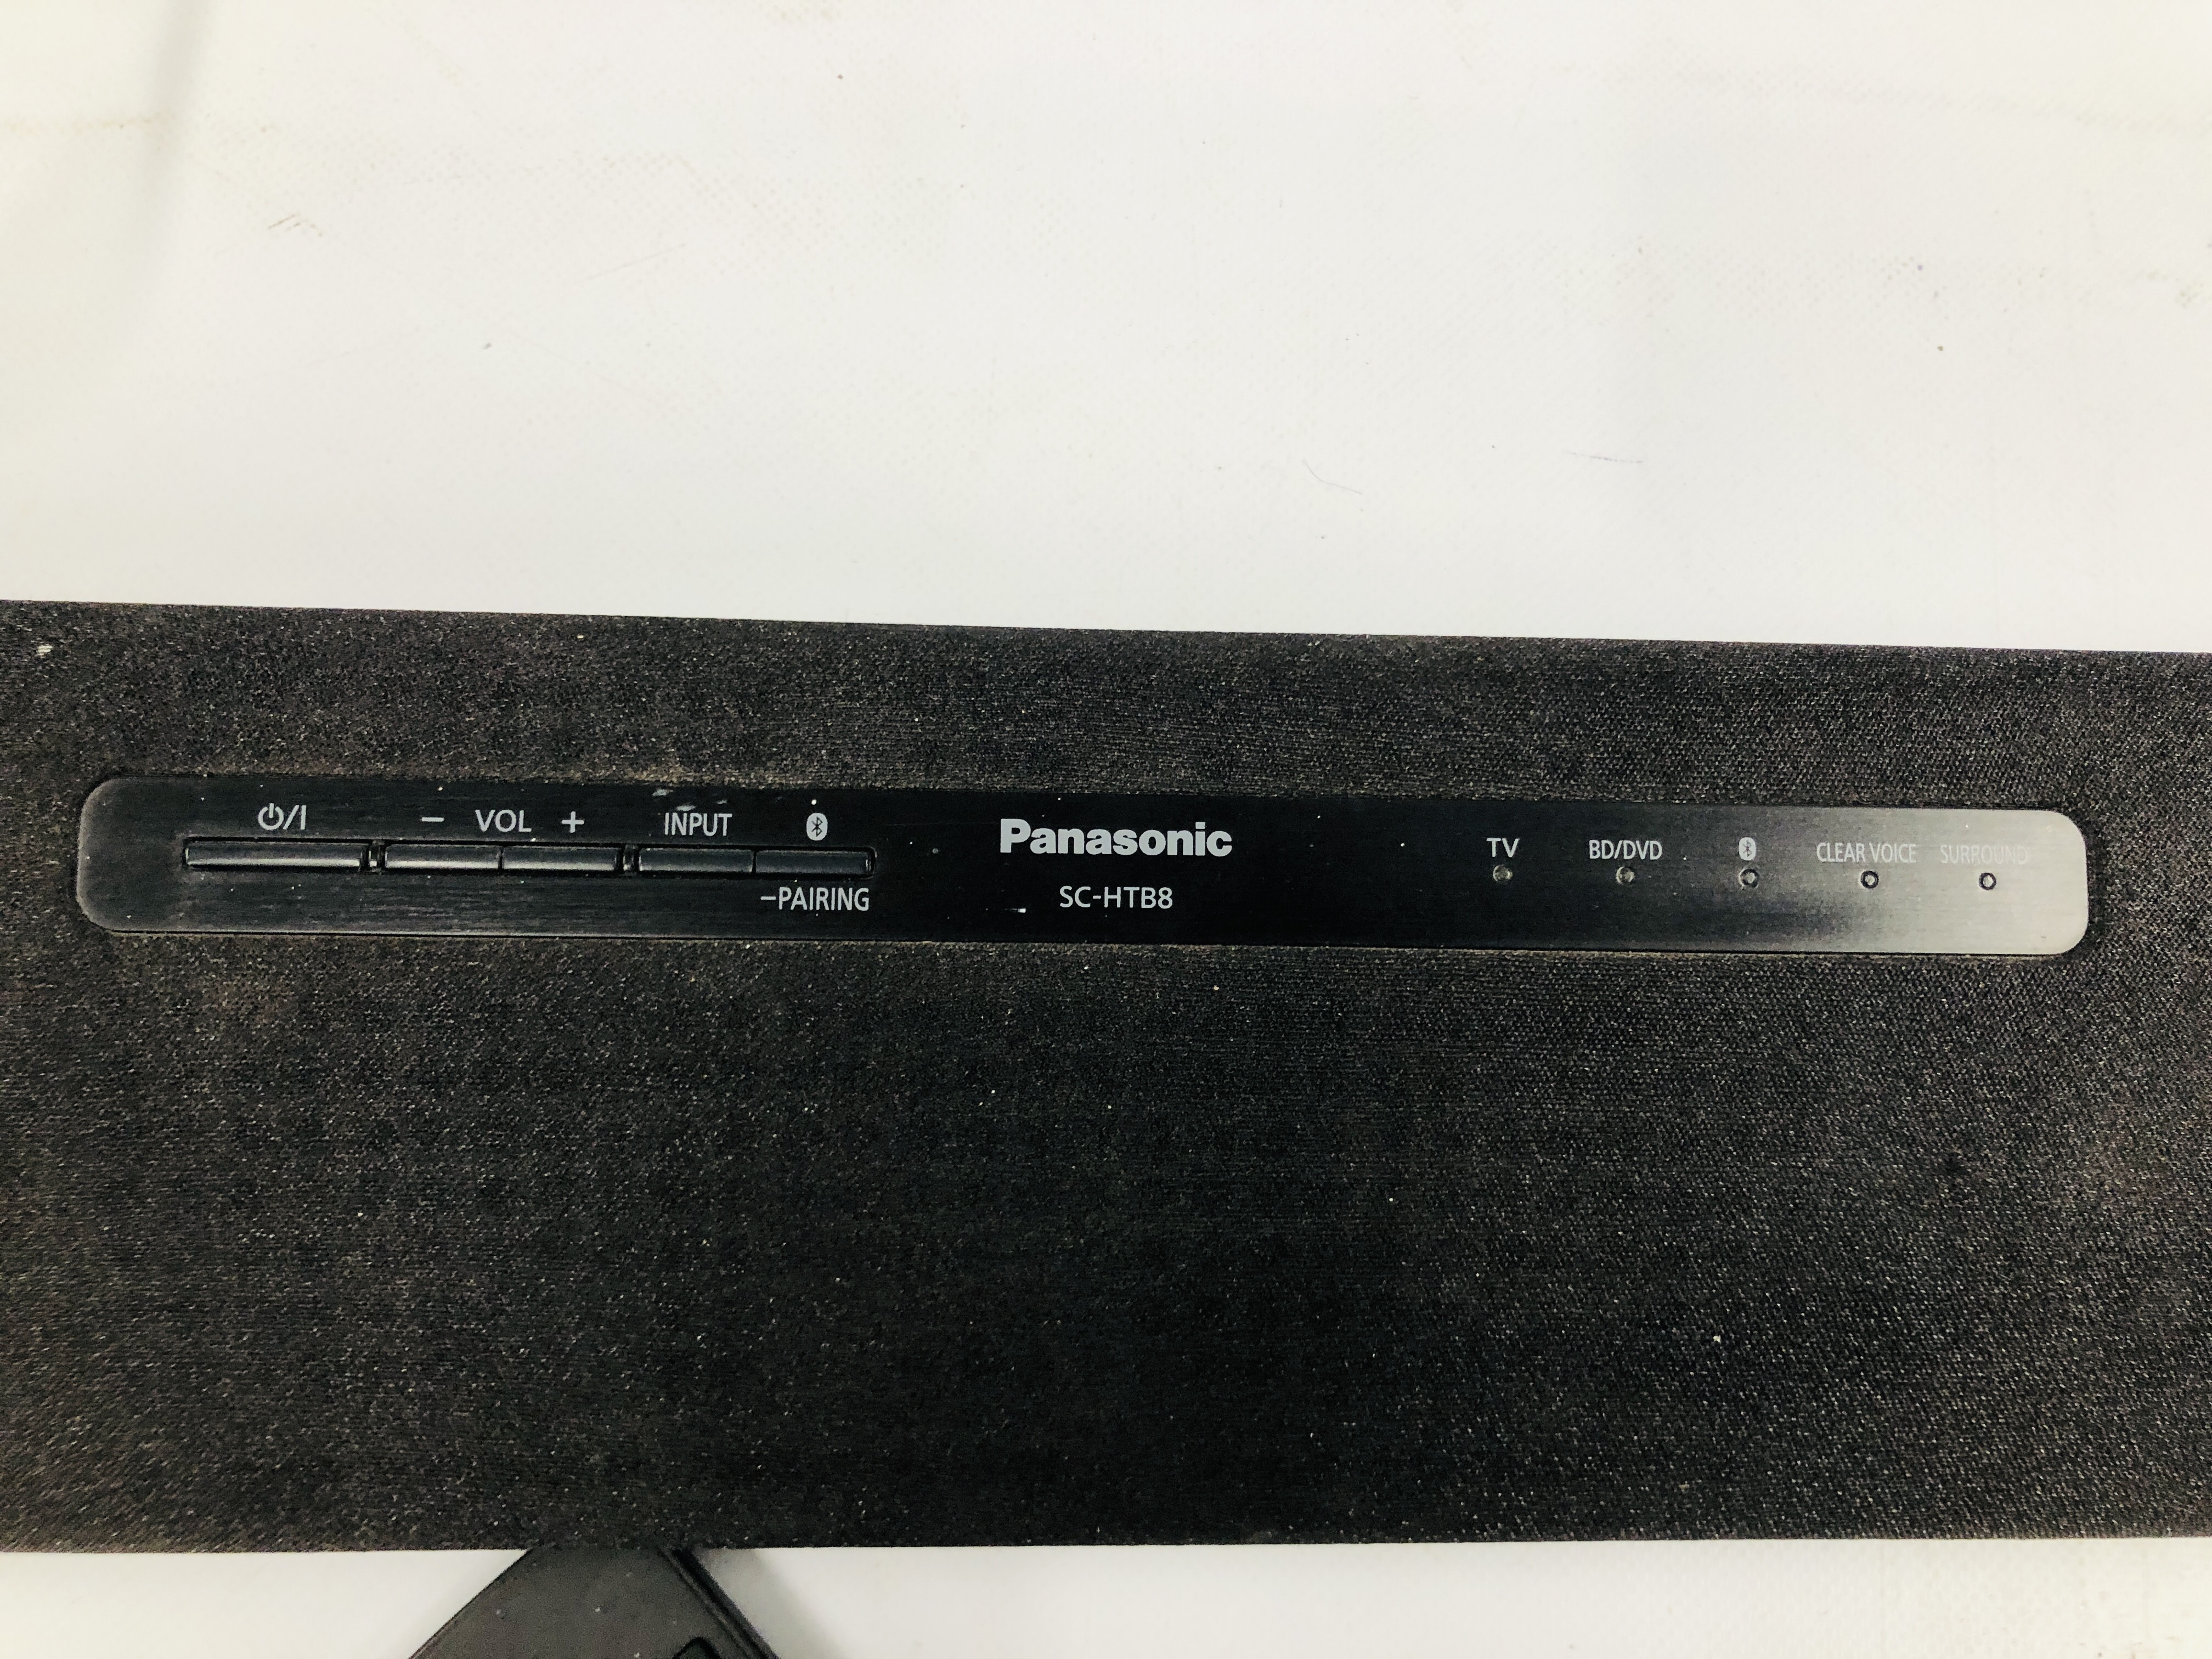 A PANASONIC SOUND BAR WITH REMOTE - MODEL SC-HTD8 - SOLD AS SEEN. - Image 2 of 4